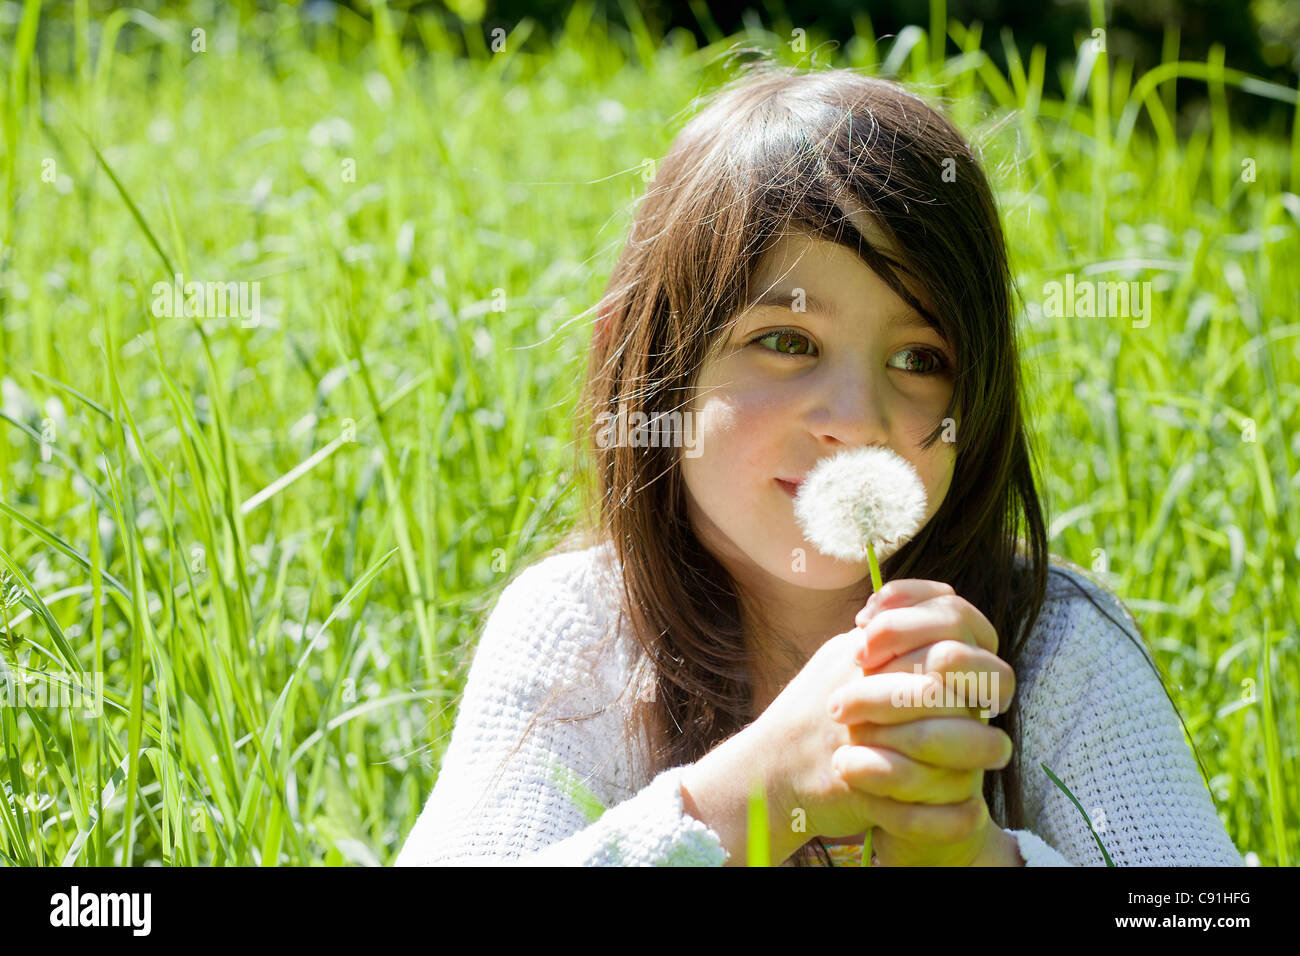 Girl smelling dandelion in tall grass Stock Photo